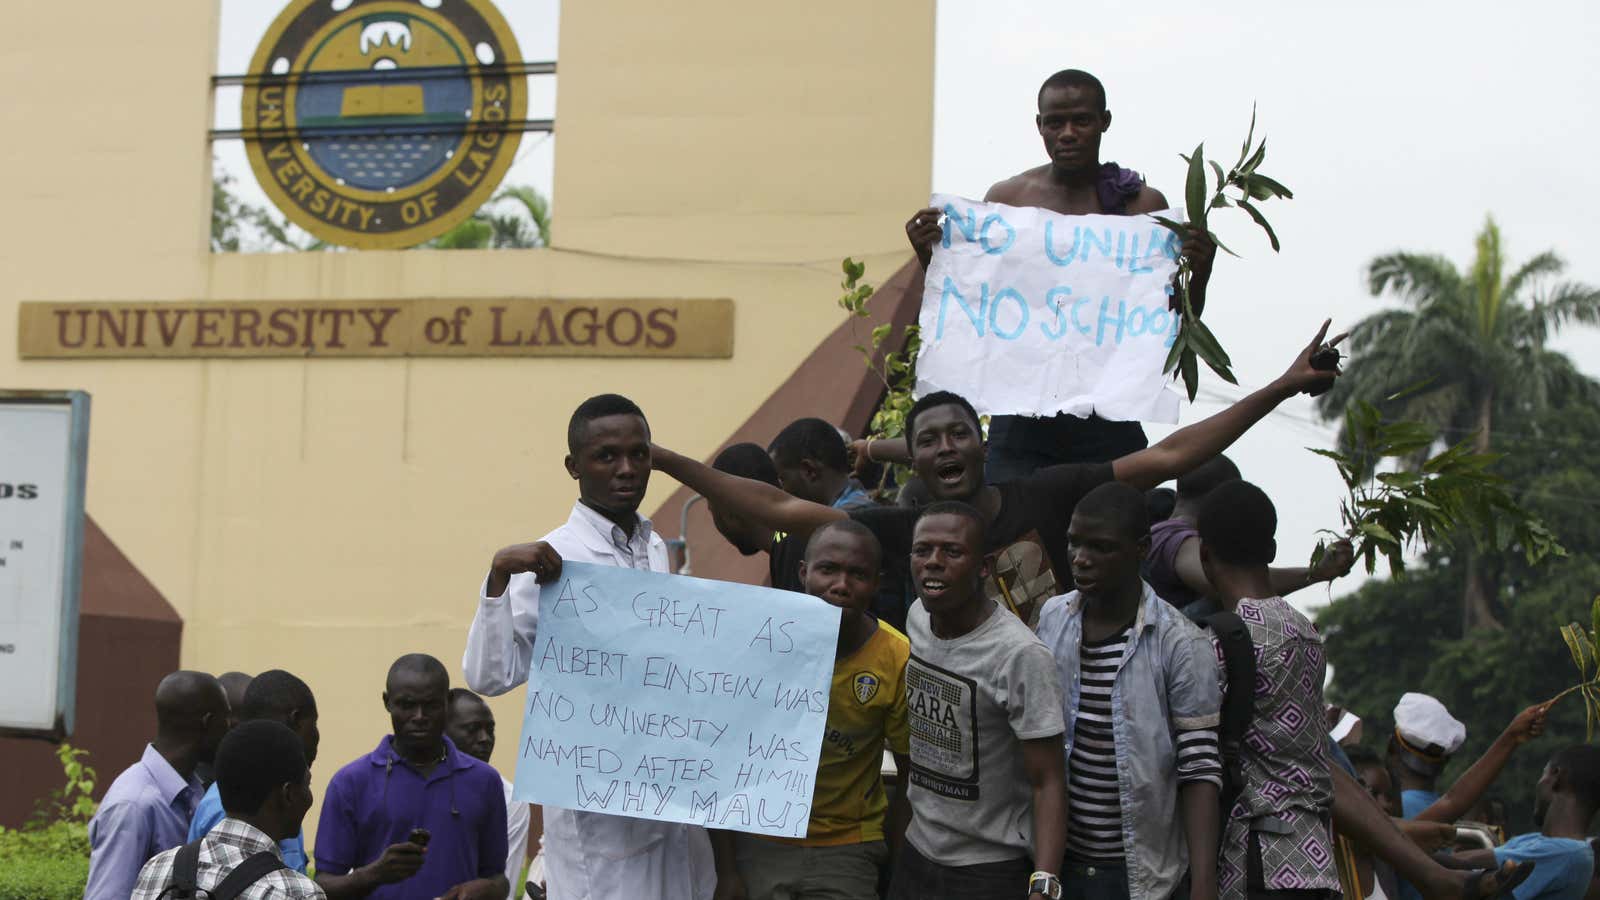 Nigerian universities have been hampered by numerous closures due to student and staff unrest in the recent past